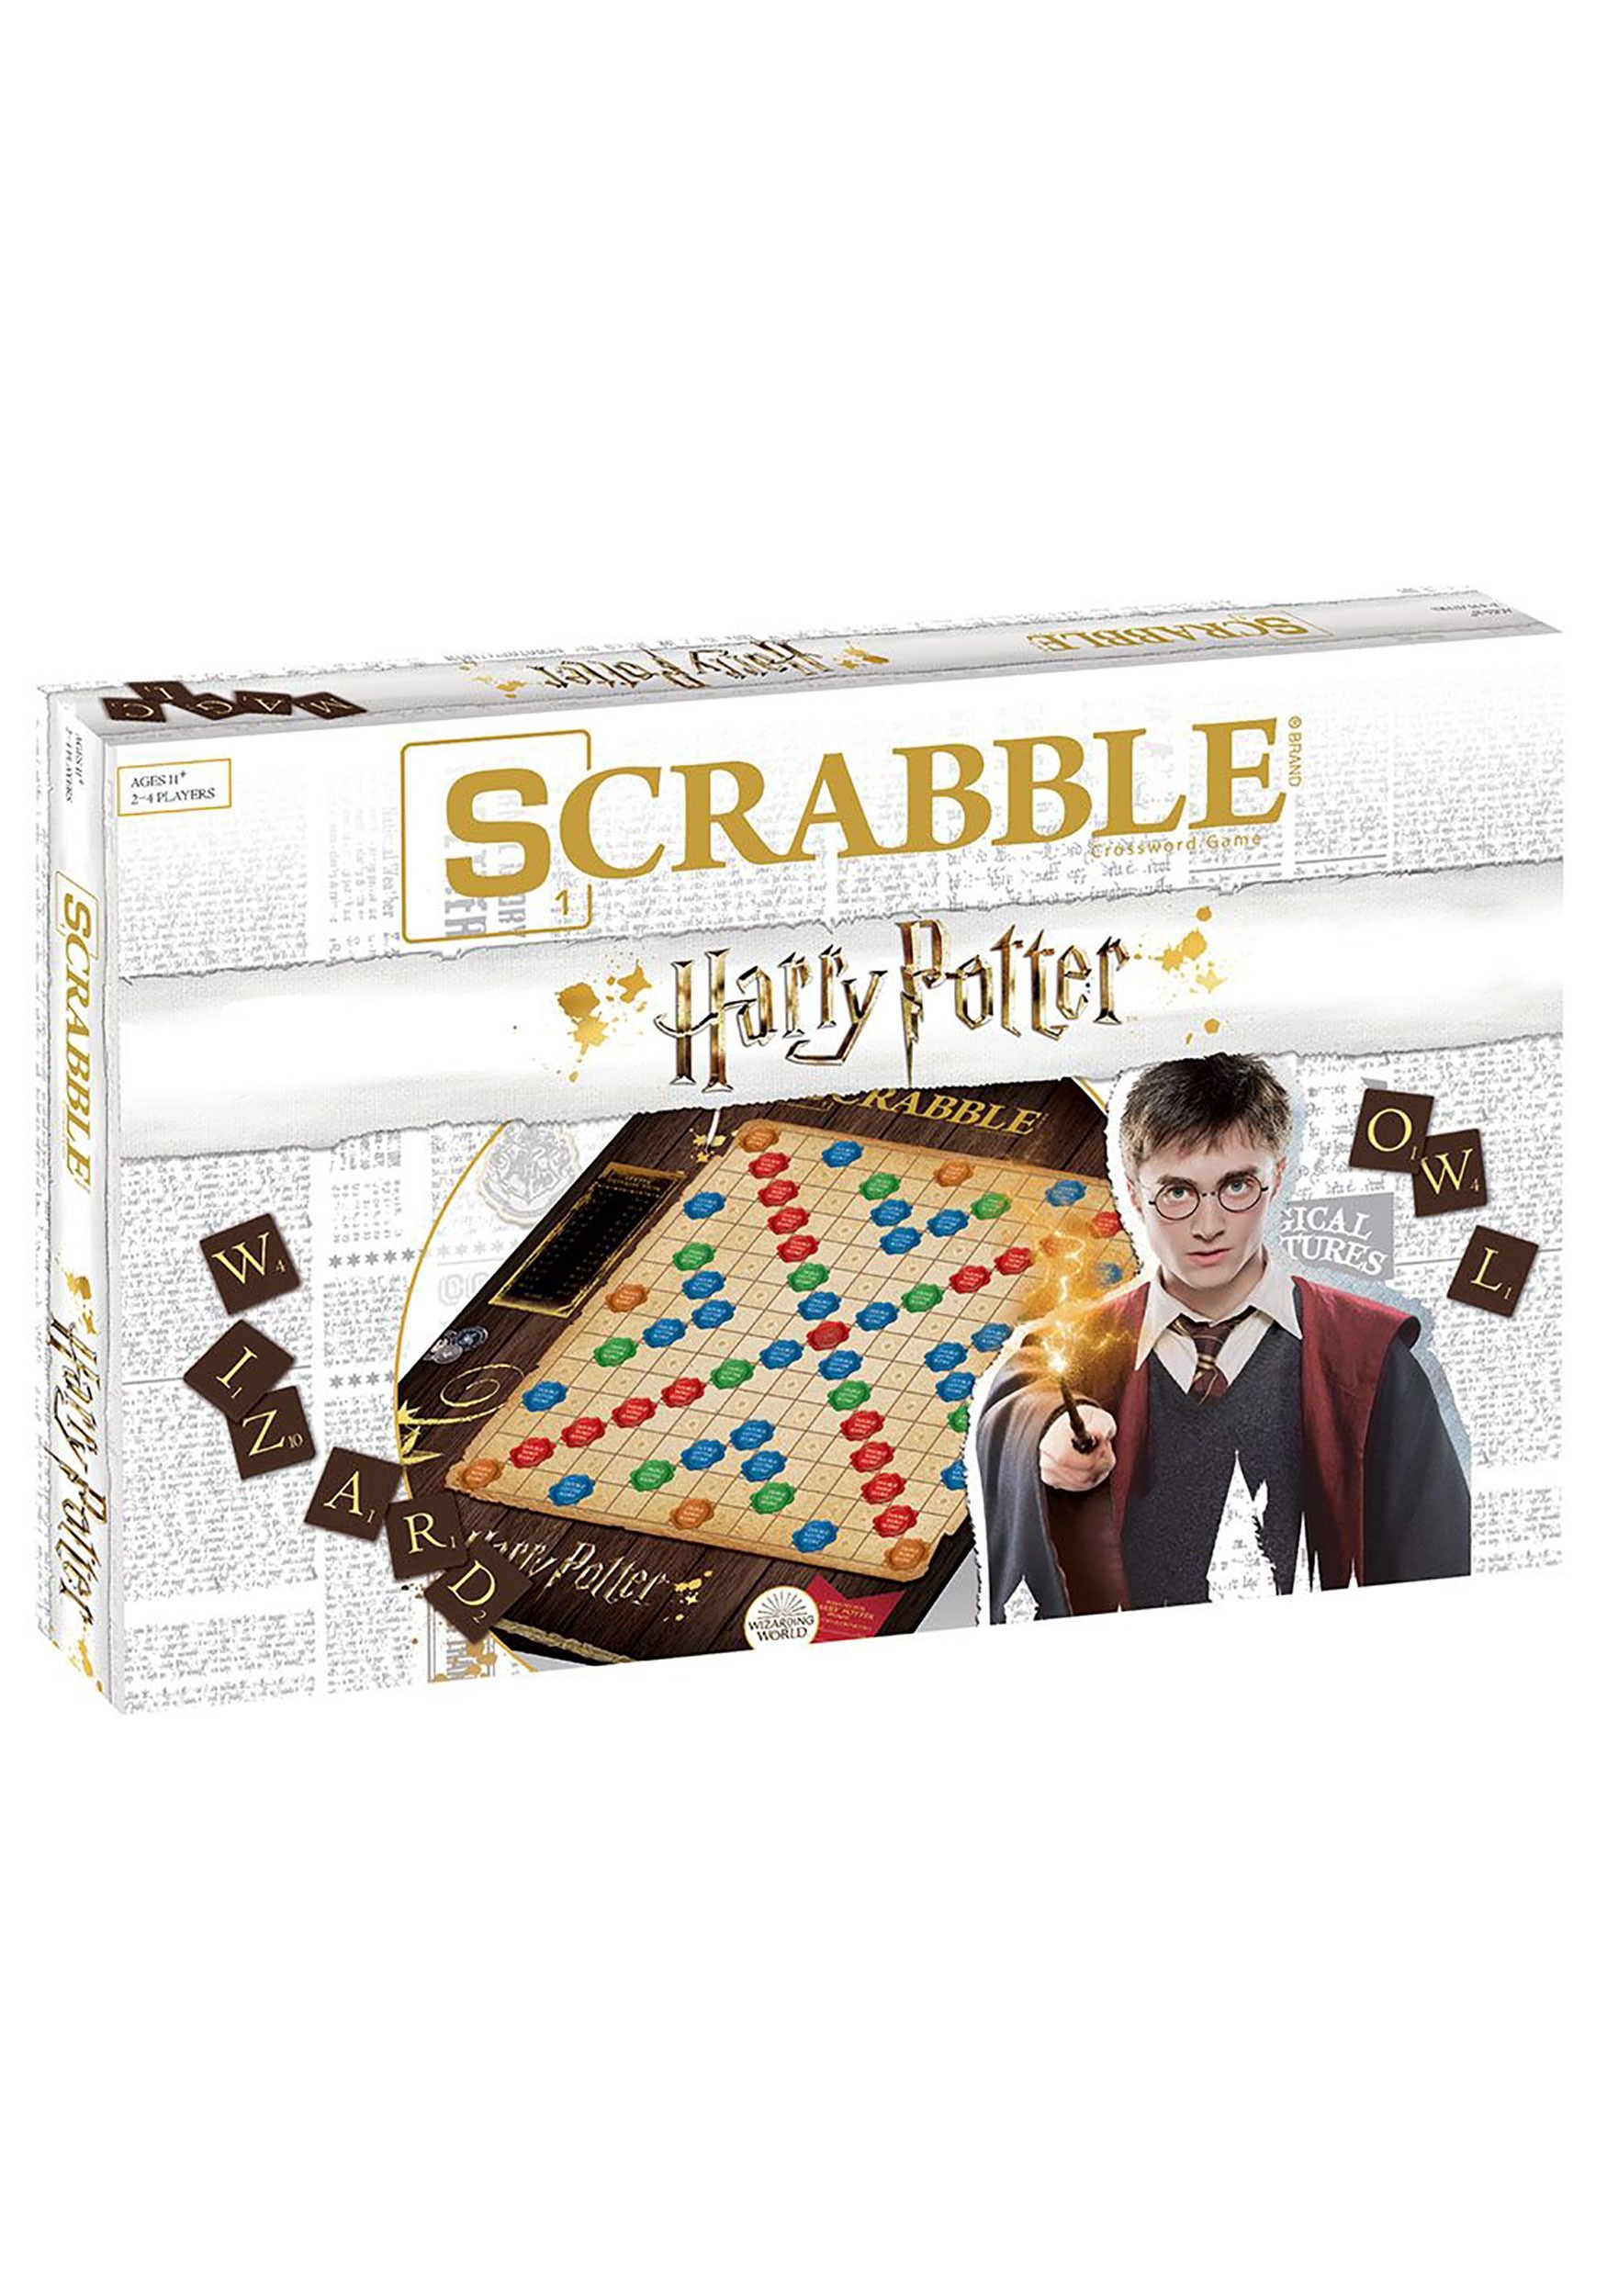 World of Harry Potter SCRABBLE Board Game